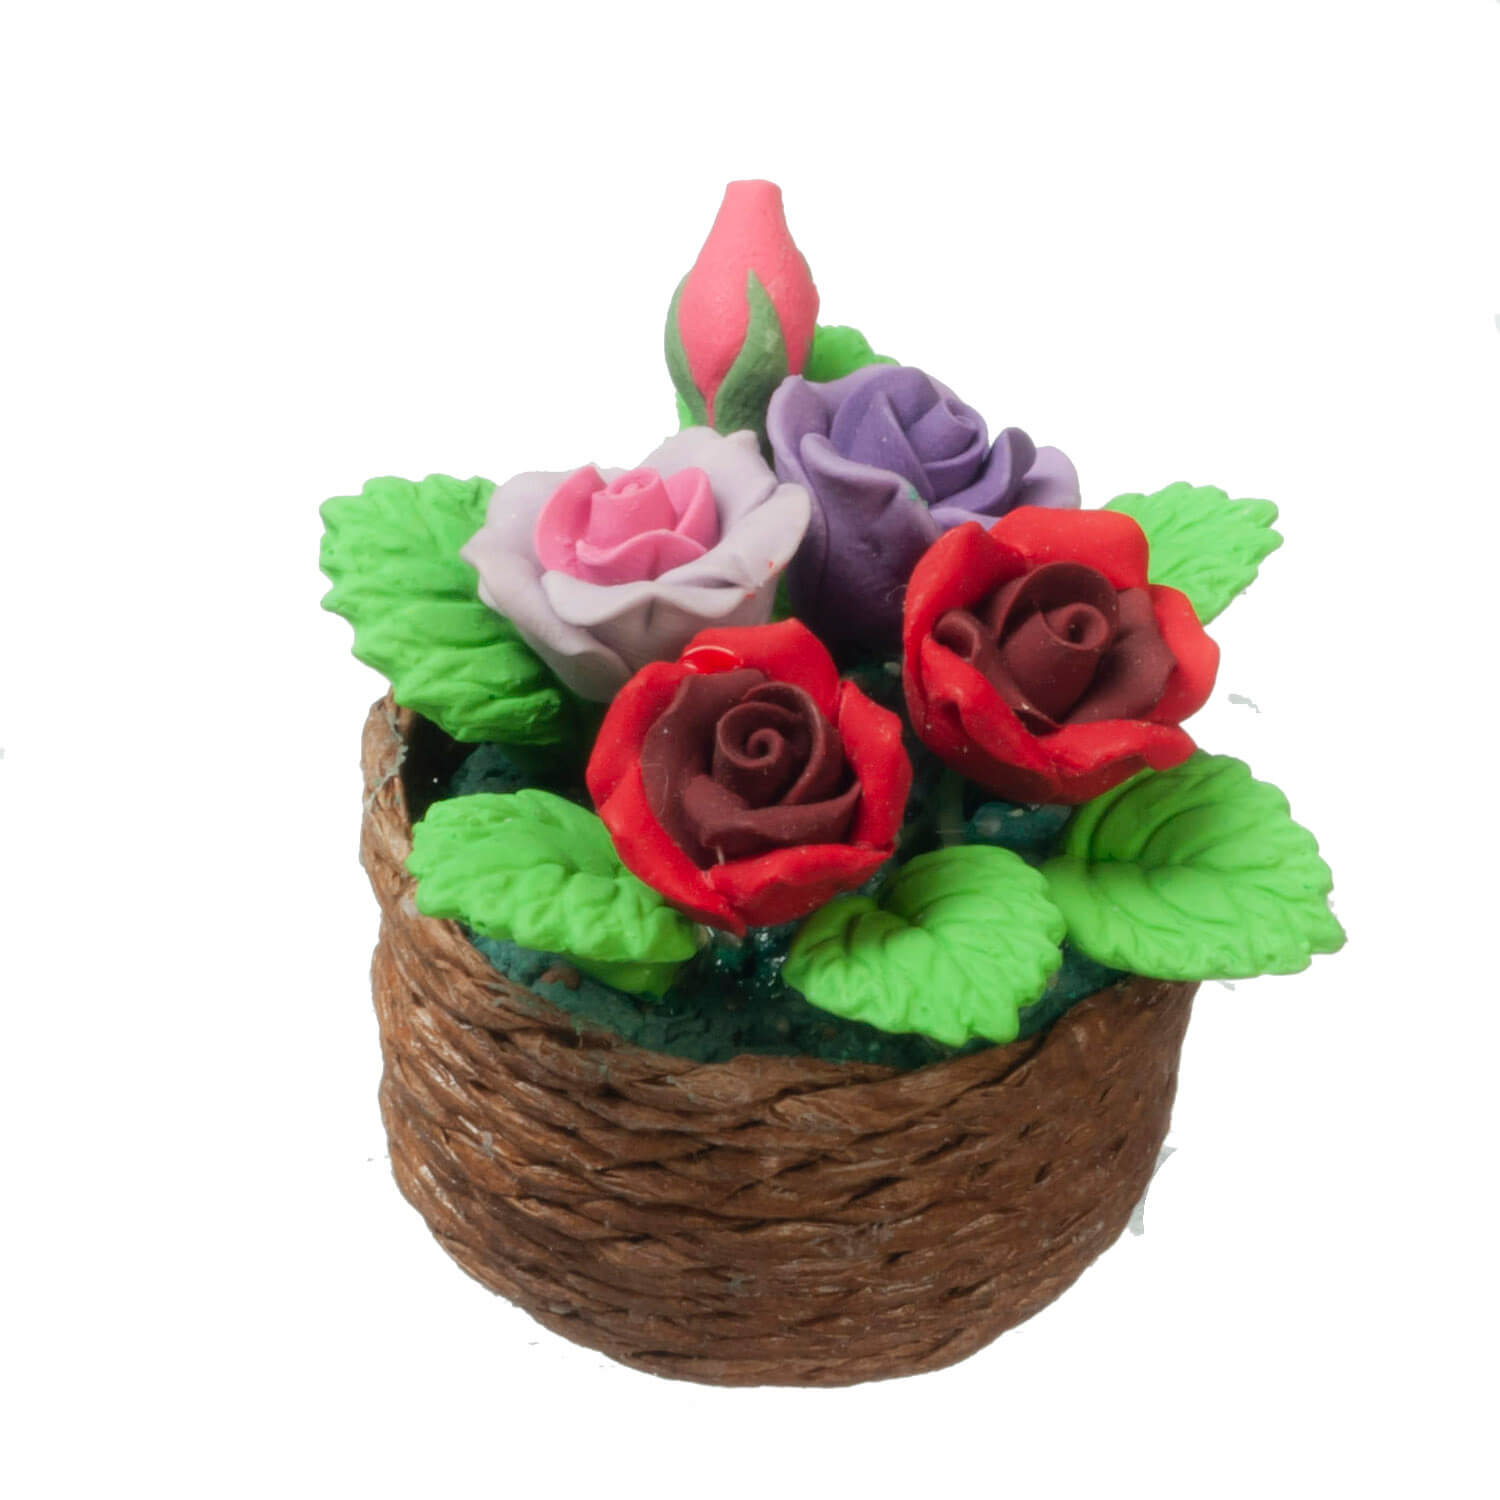 Potted Roses in a Basket Planter